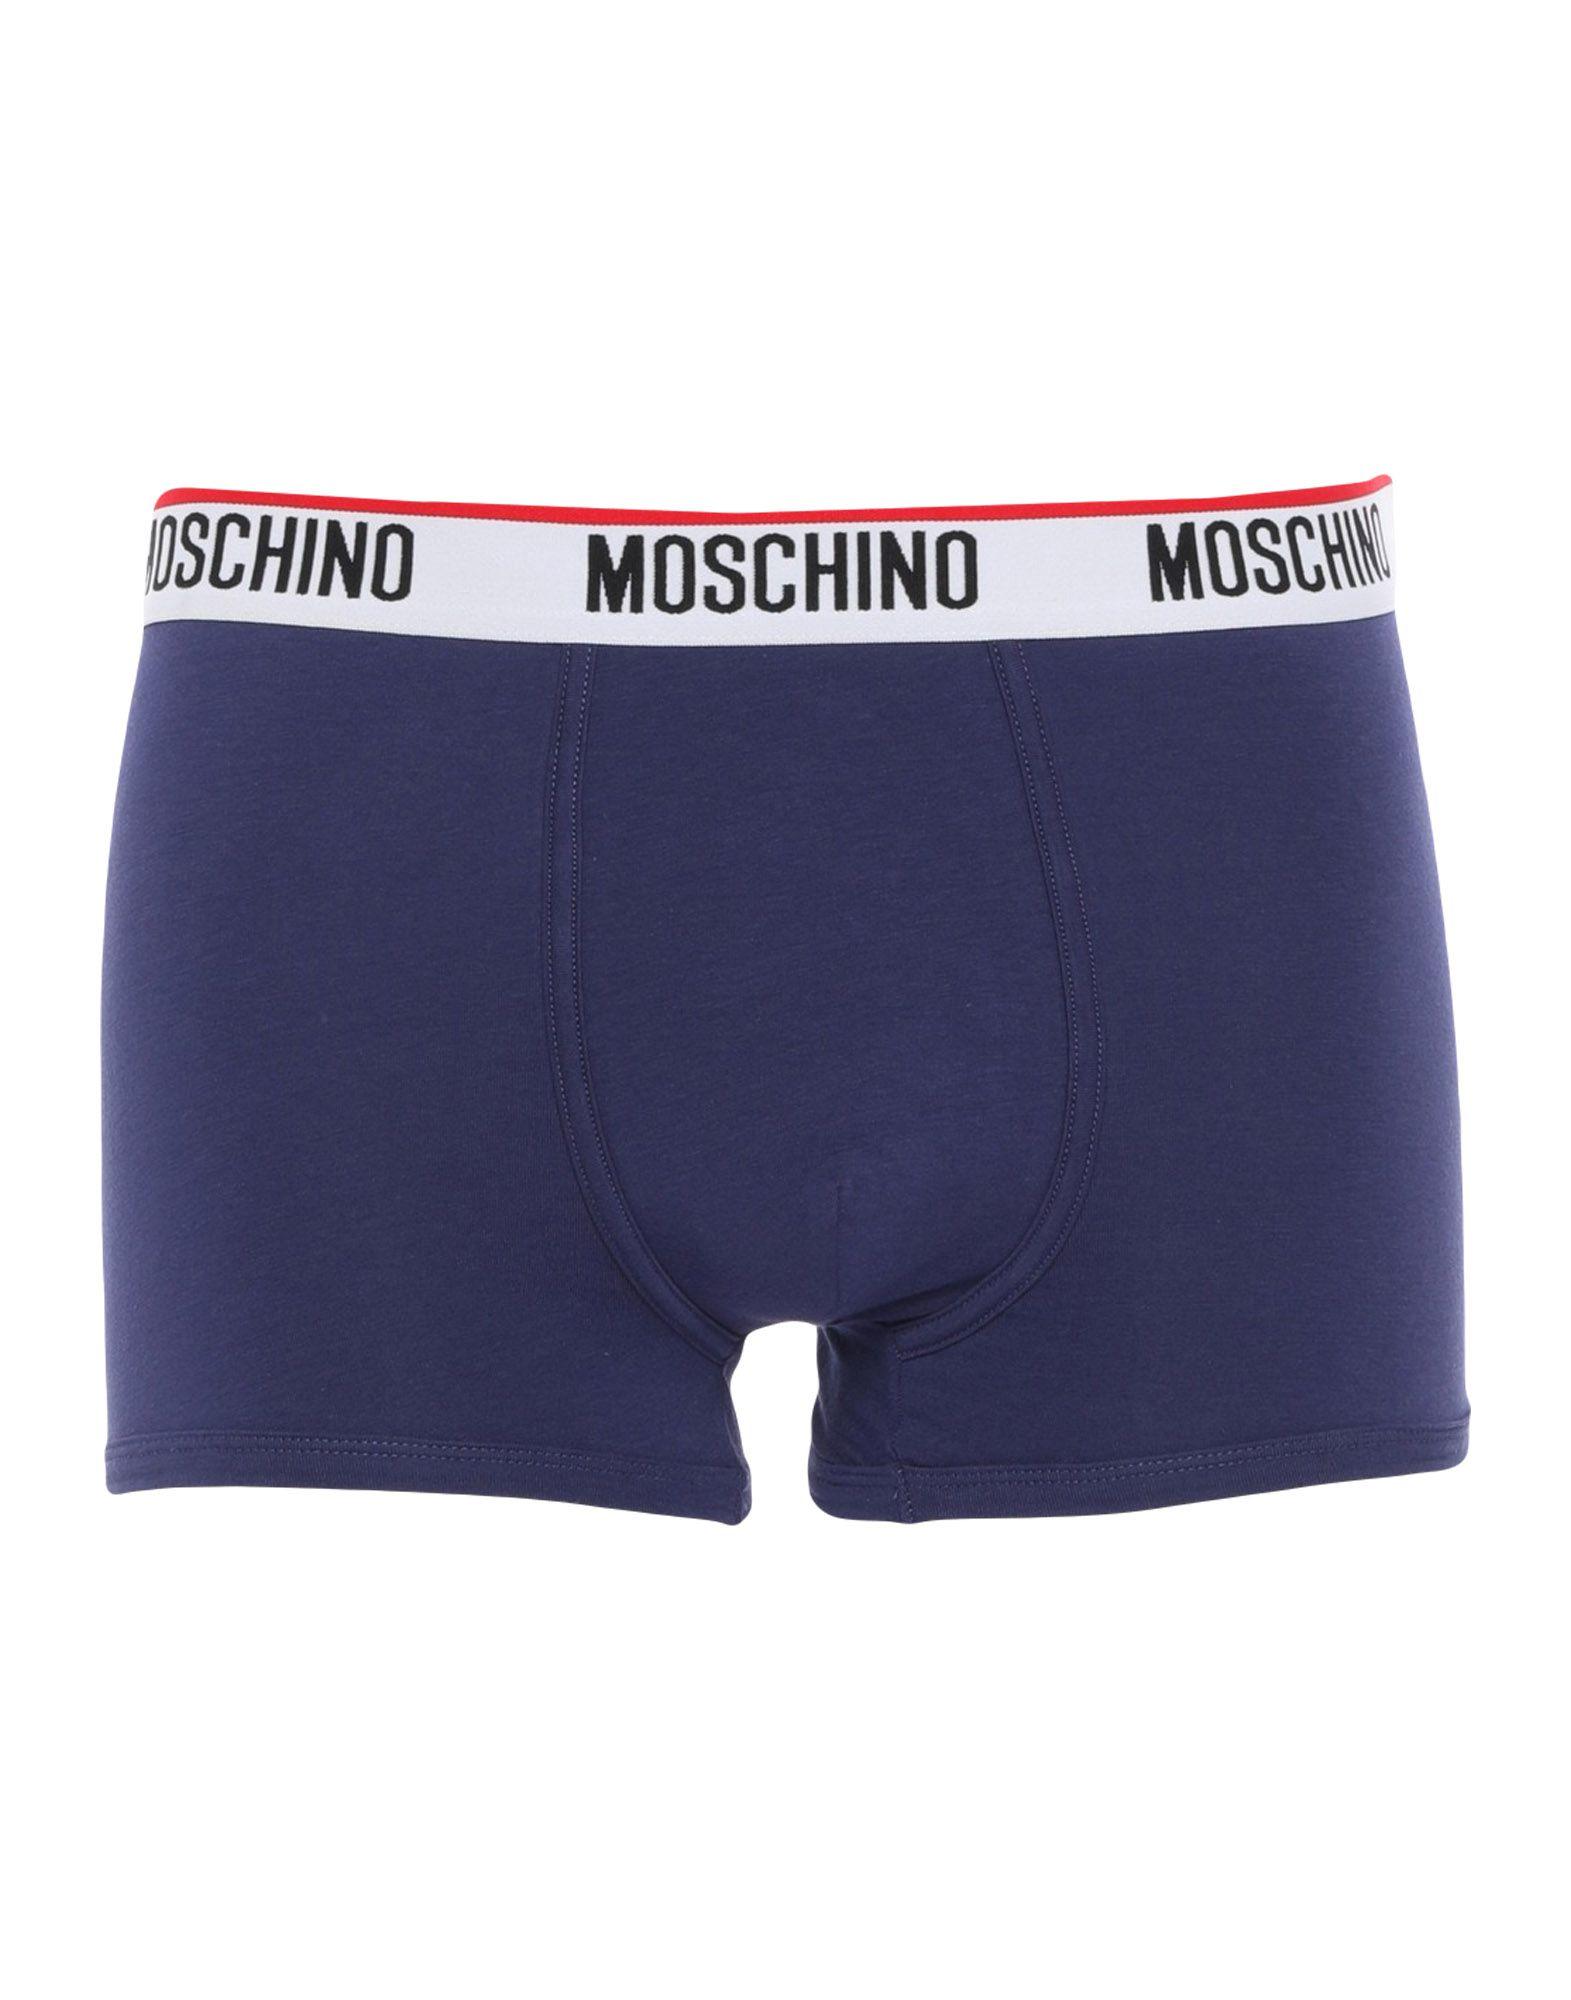 Moschino Cotton Boxer in Blue for Men - Lyst